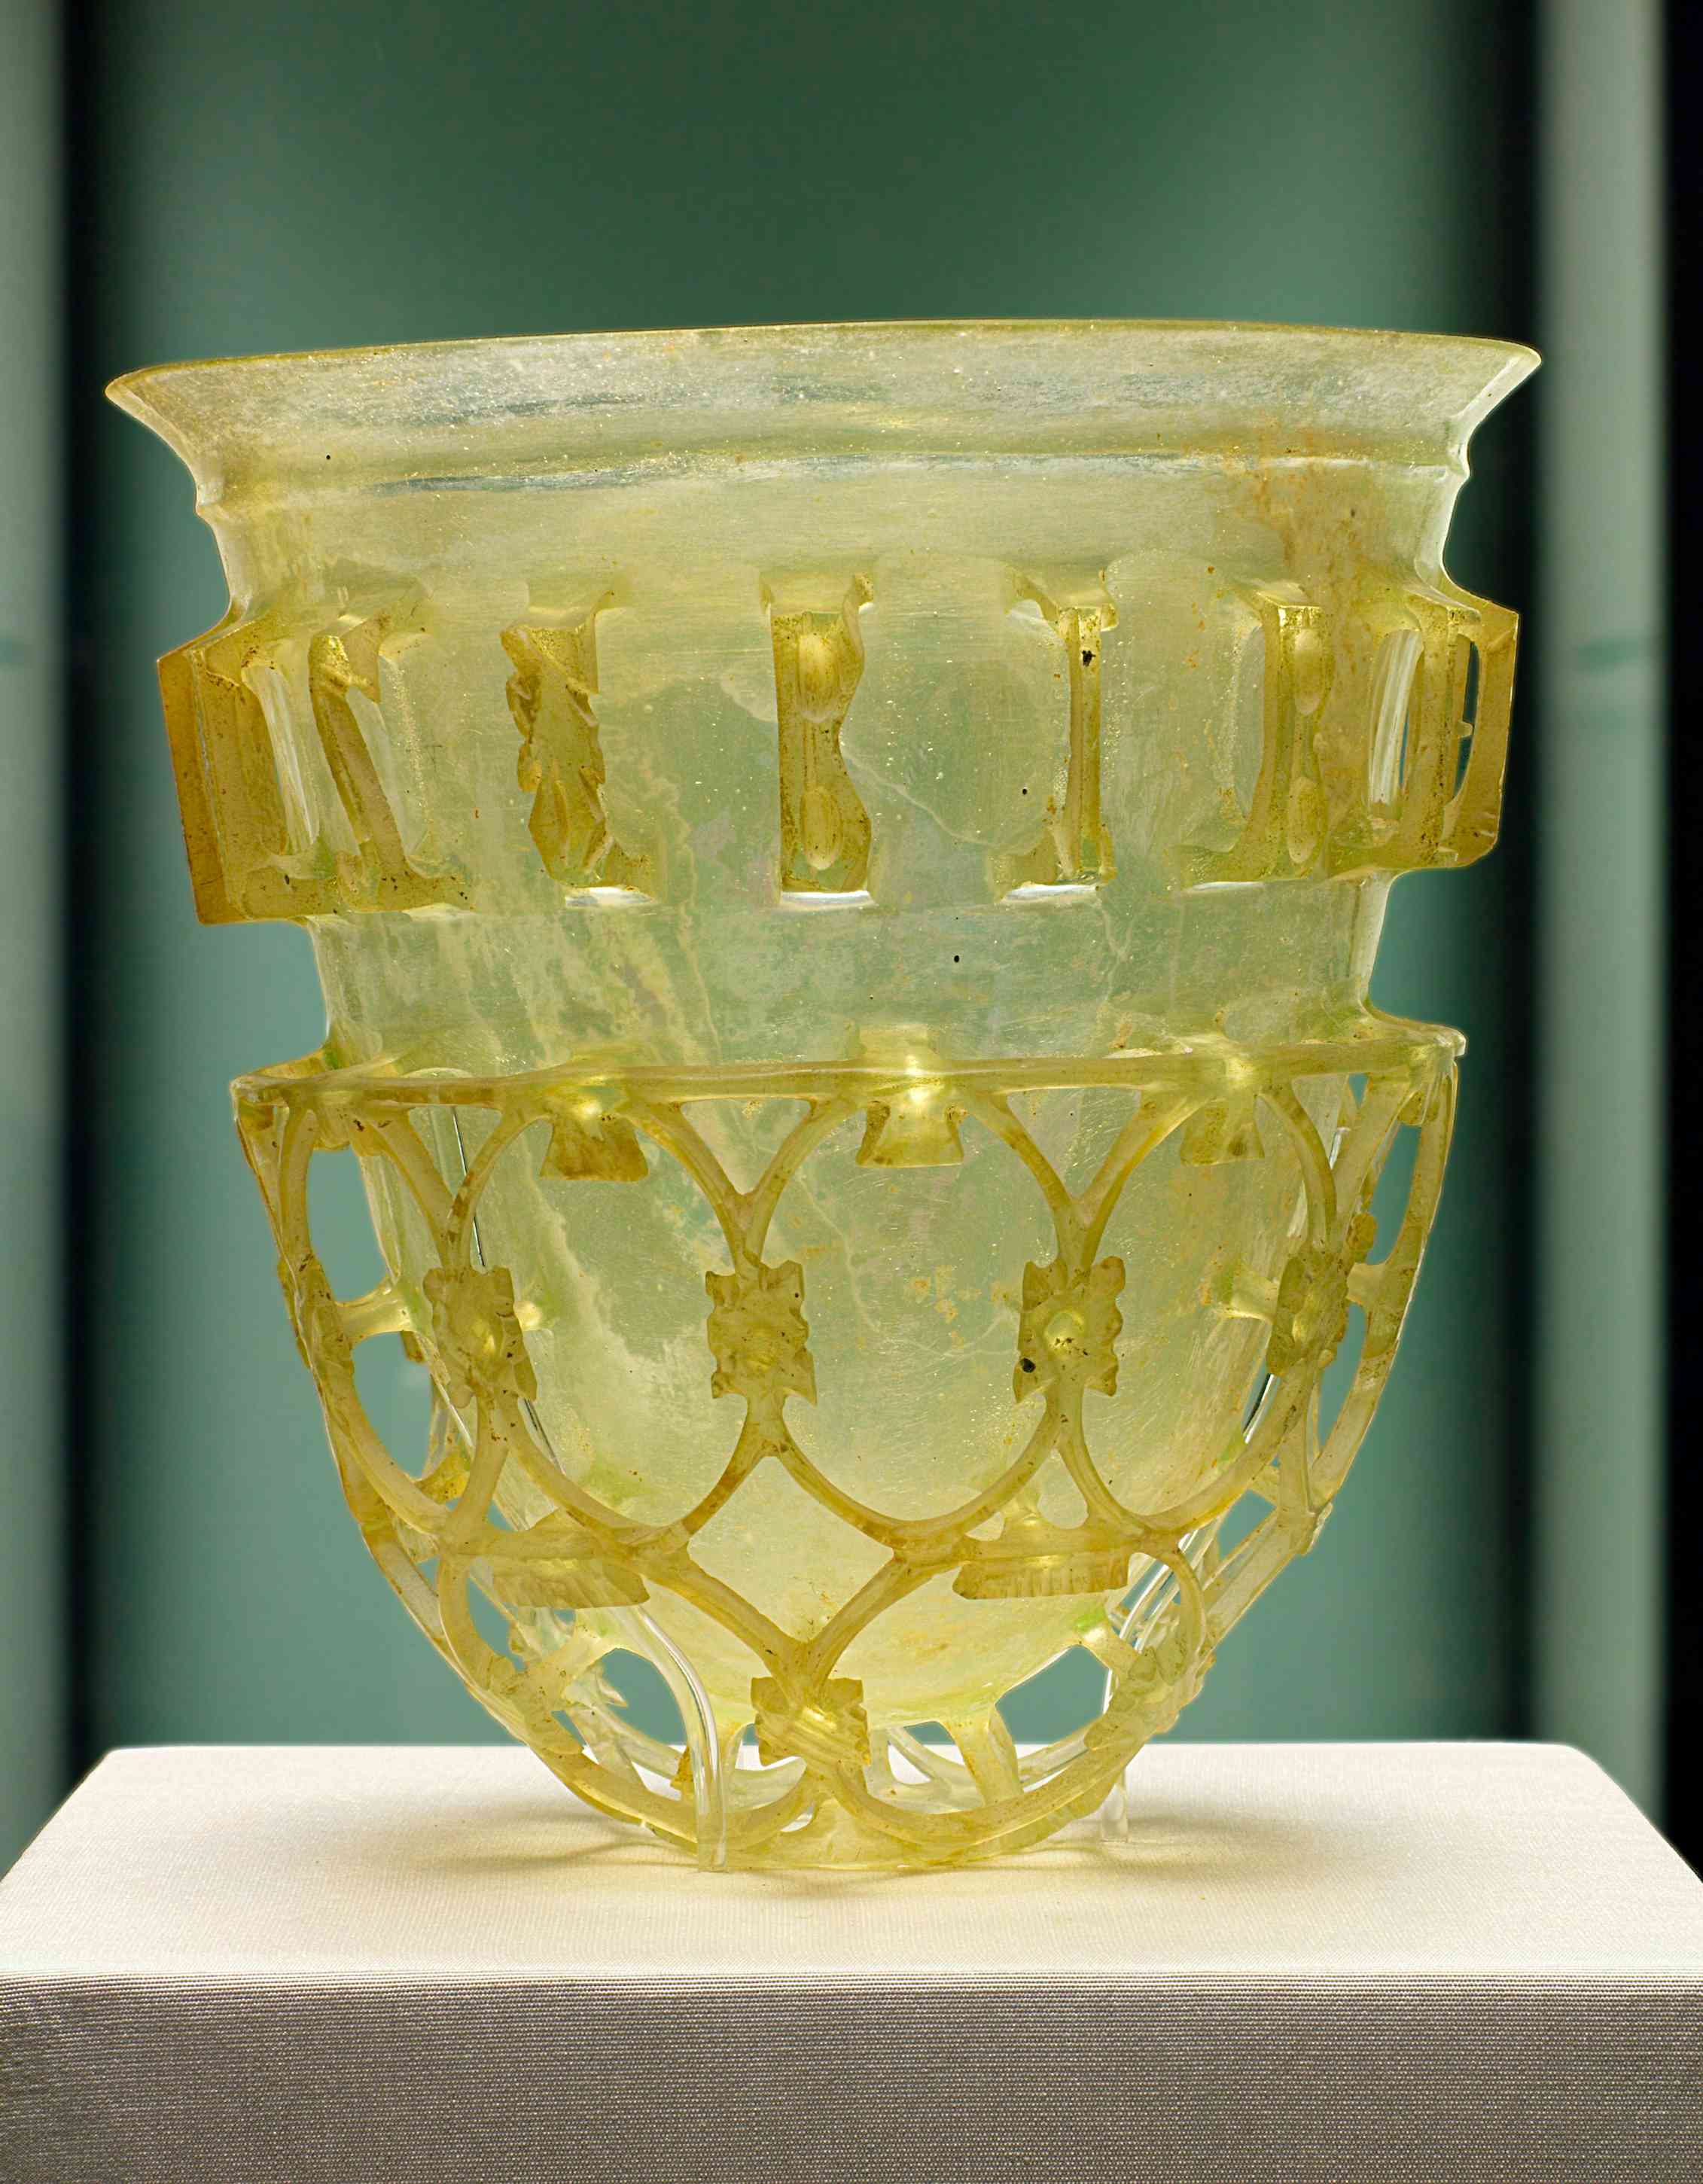 Was Glass Blowing Really Invented in Ancient Rome?